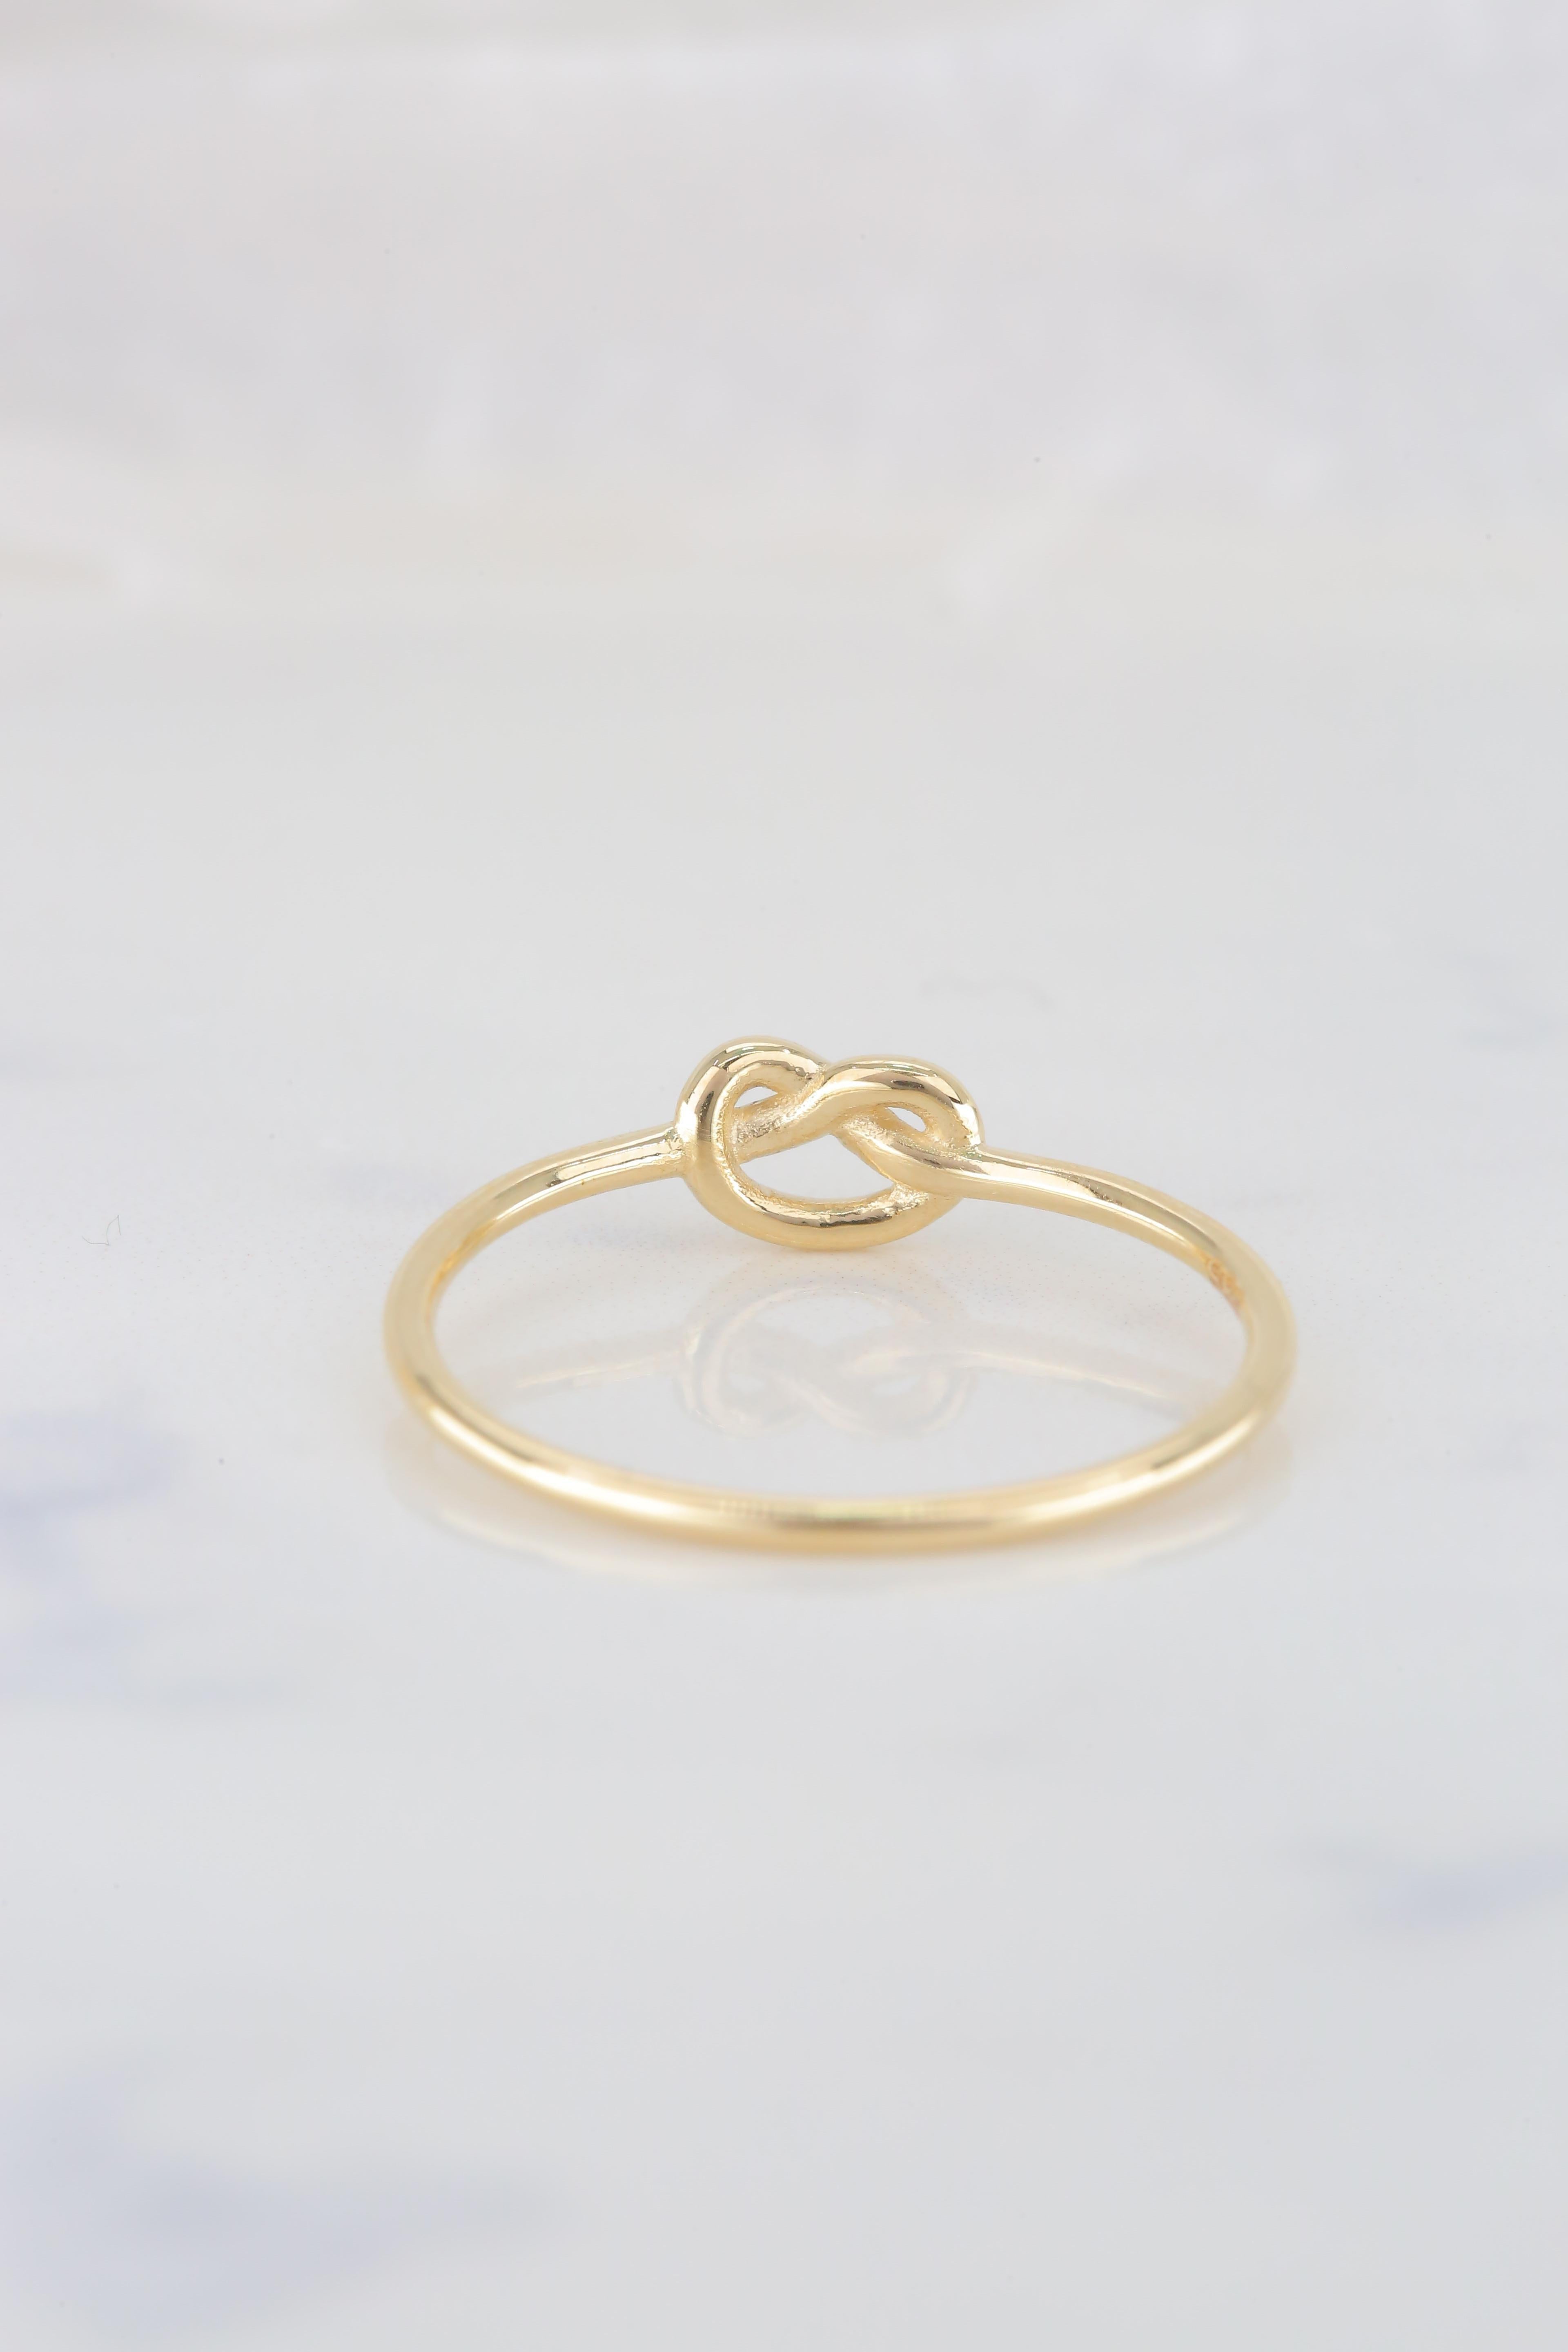 For Sale:  Gold Knot Ring, 14k Solid Gold, Dainty Ring, Minimalist Style Ring, Promise Ring 6